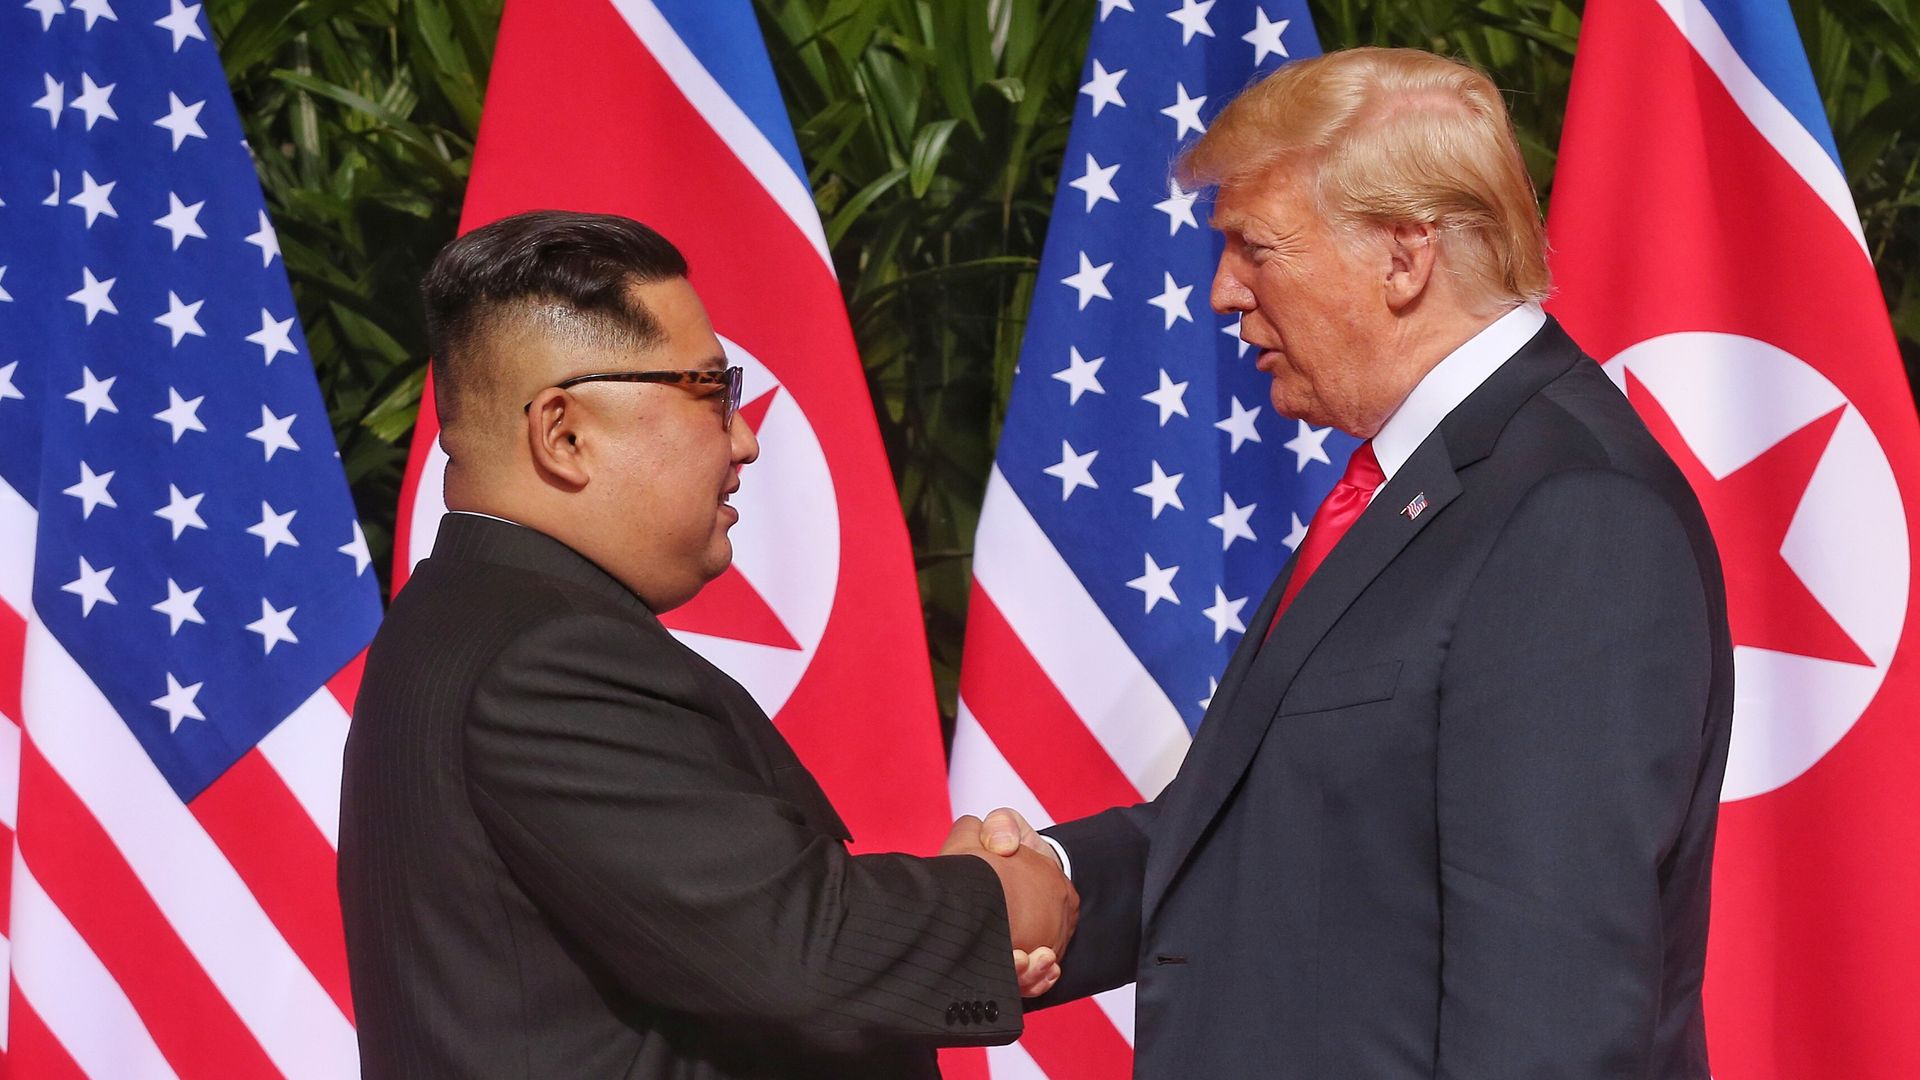 North Korean leader Kim Jong-un and President Trump during their historic  summit in Singapore last month. Photo: Handout/Getty Images